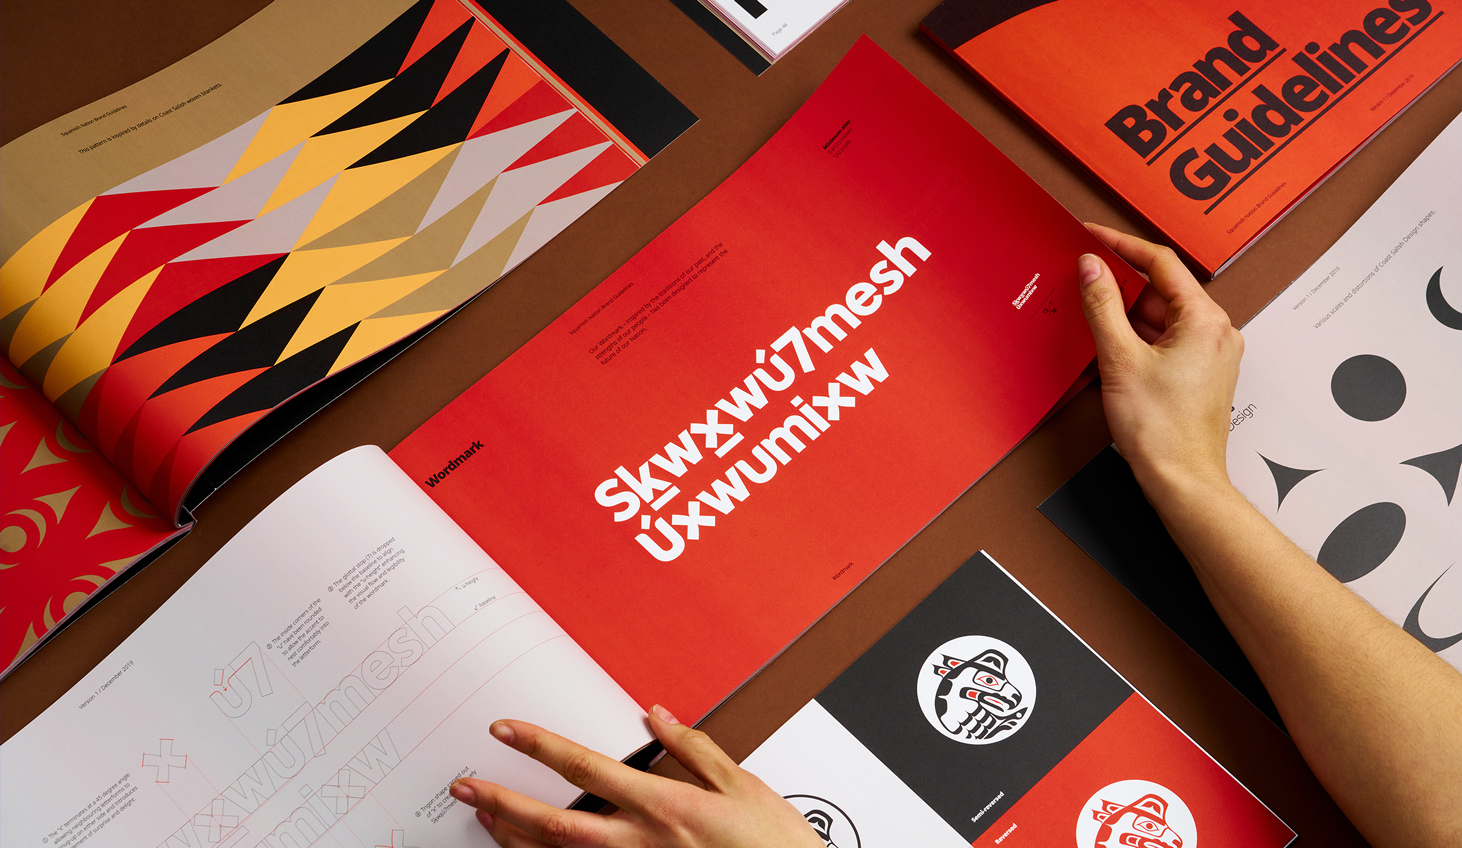 Someone flipping through the Squamish Nation Brand guidelines. It sows the white word mark that says "Skwxwú7mesh Úxwumixw" (Squamish Nation) and a red background.